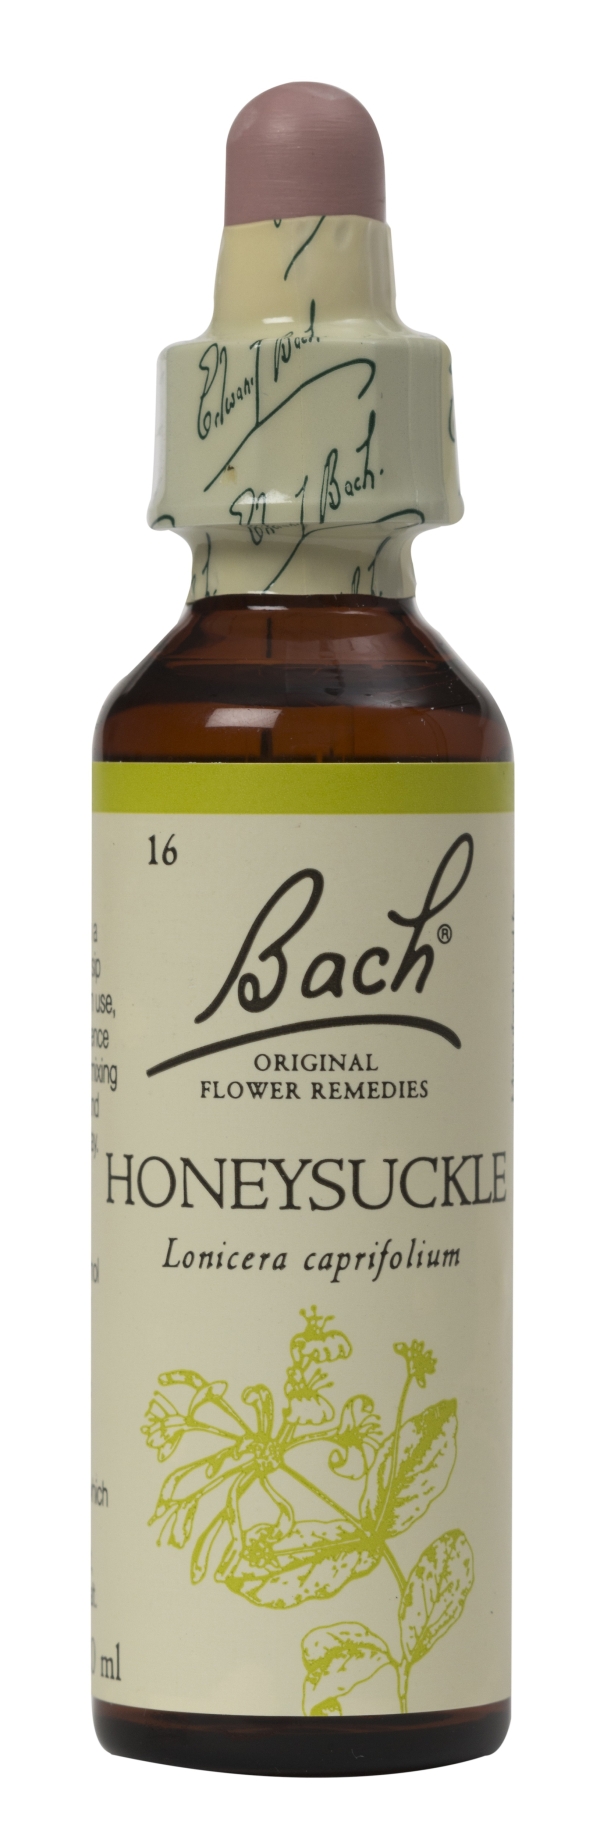 Nelson Bach Flower Remedies: Bach Honeysuckle Flower Remedy (20ml) available online here